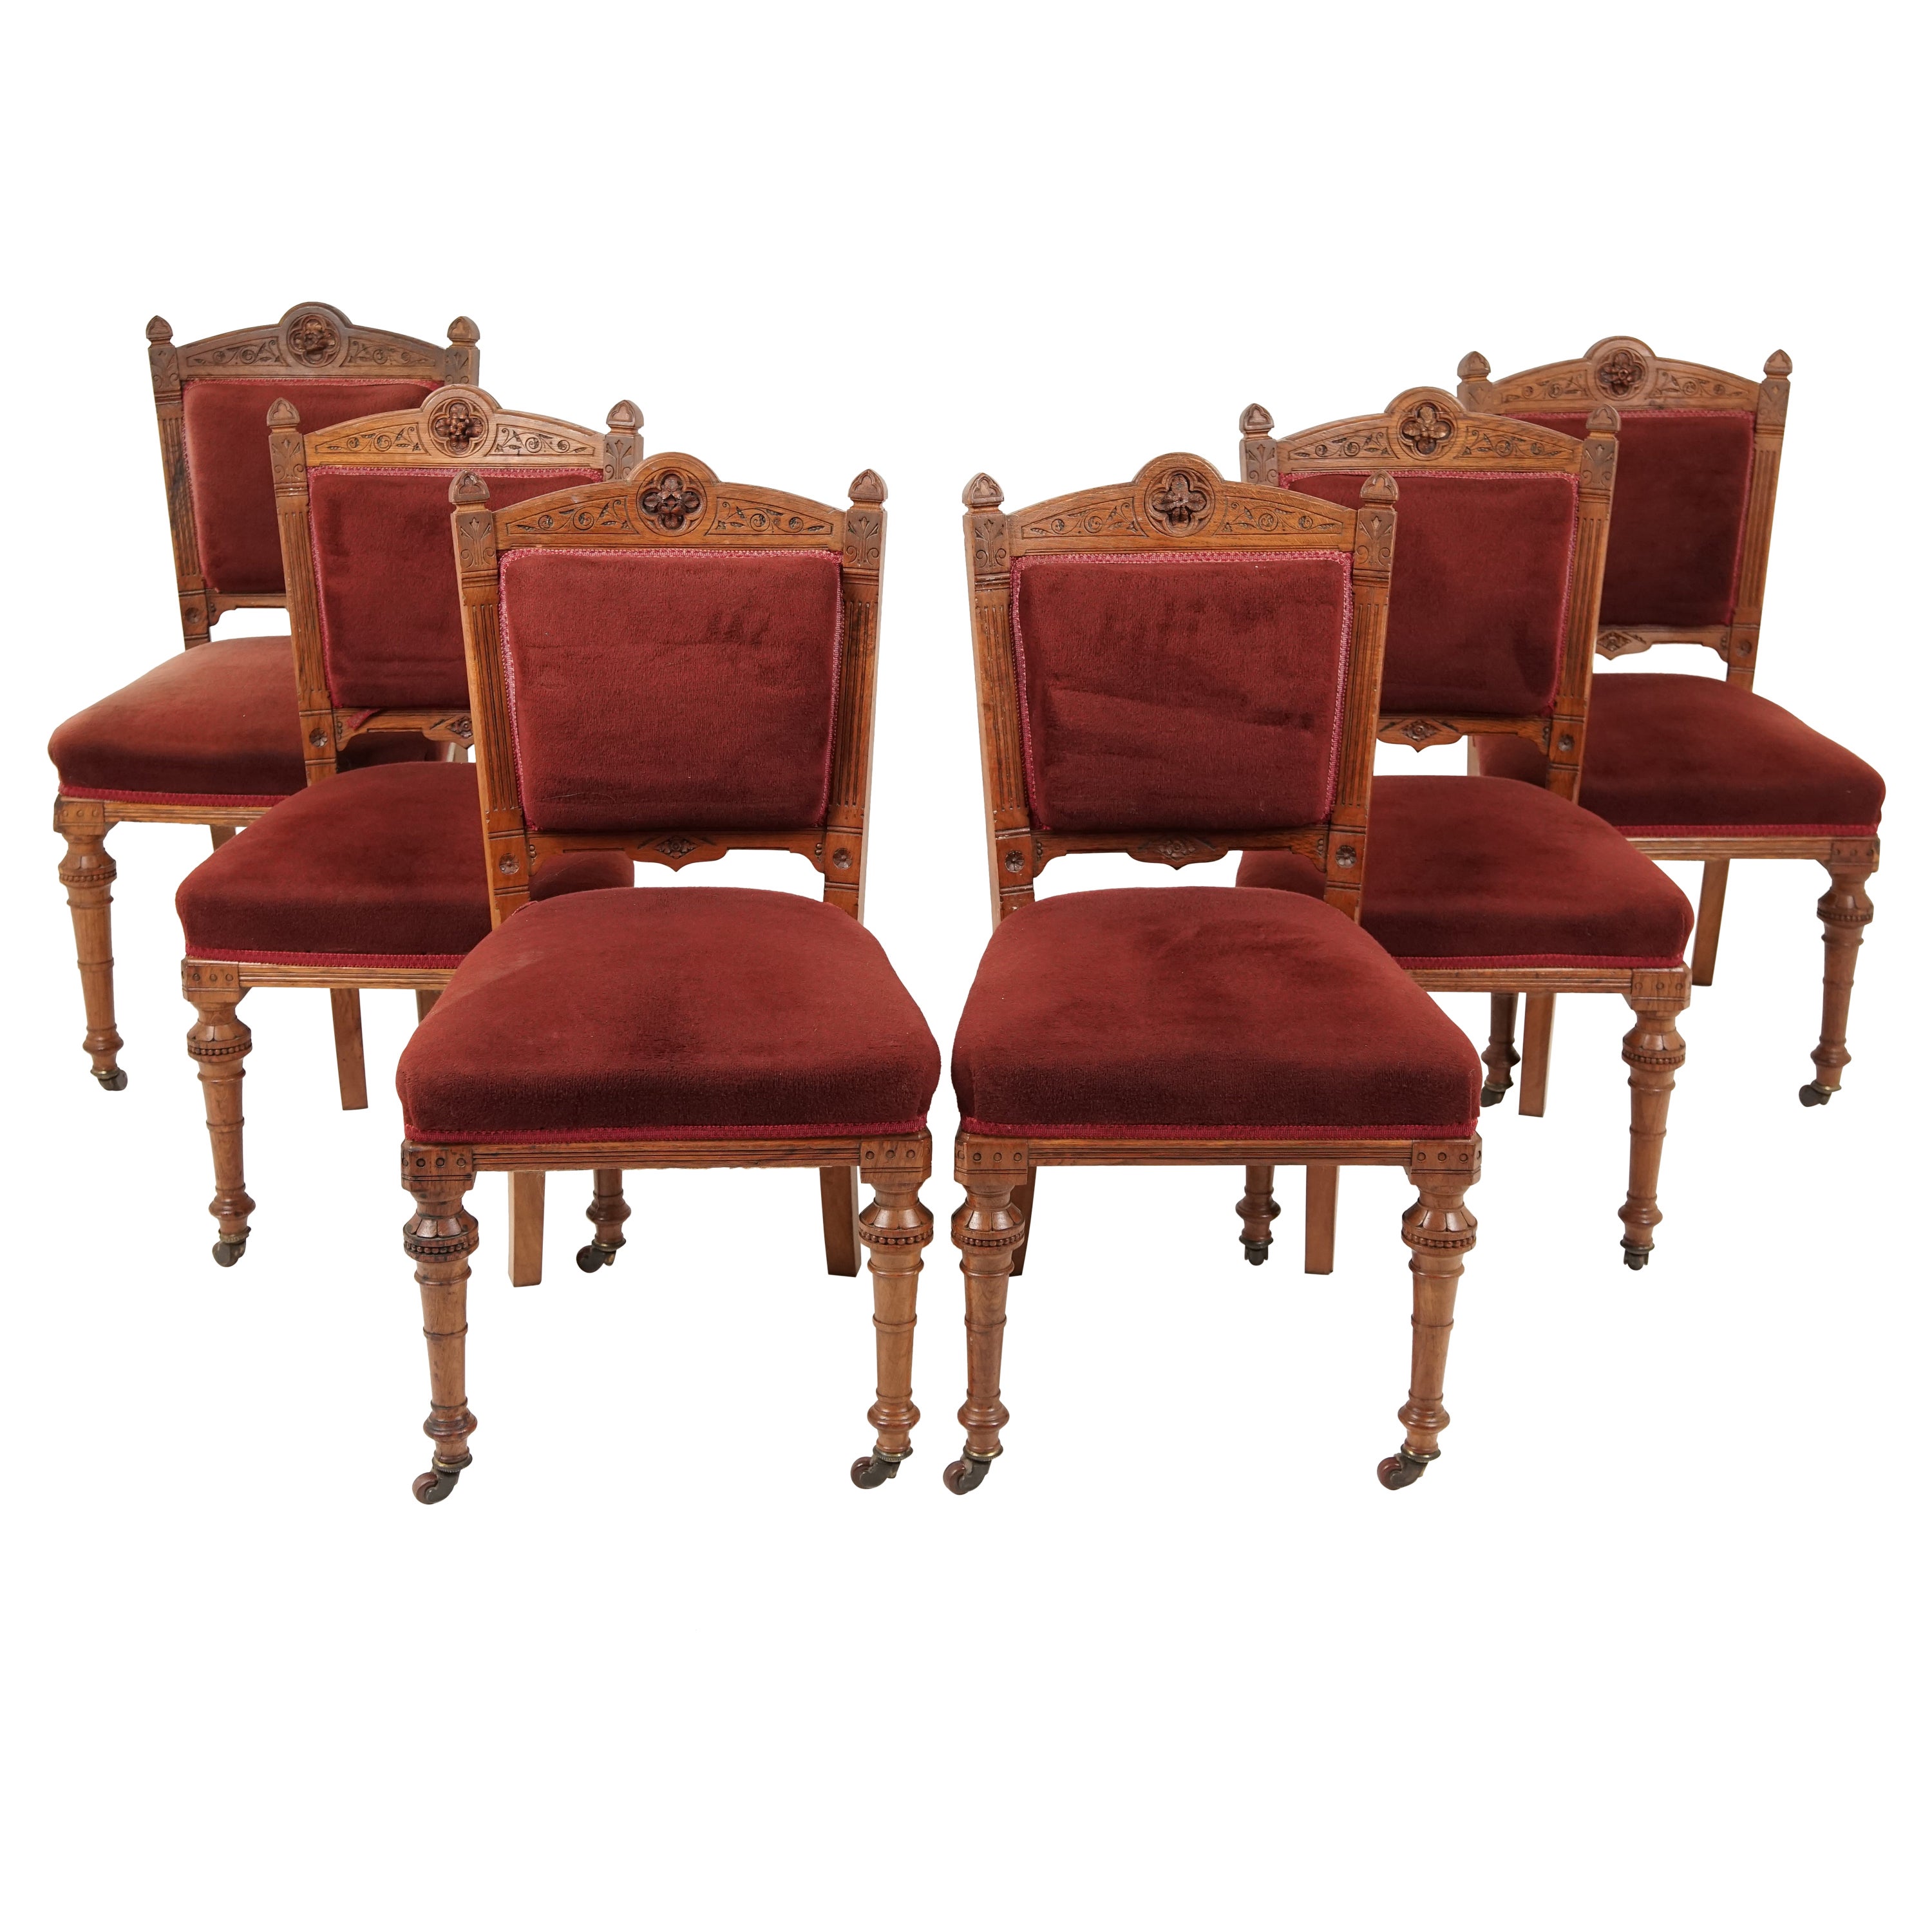 Set of 6 Victorian Oak Carved Upholstered Dining Chairs, Scotland 1890, B2451